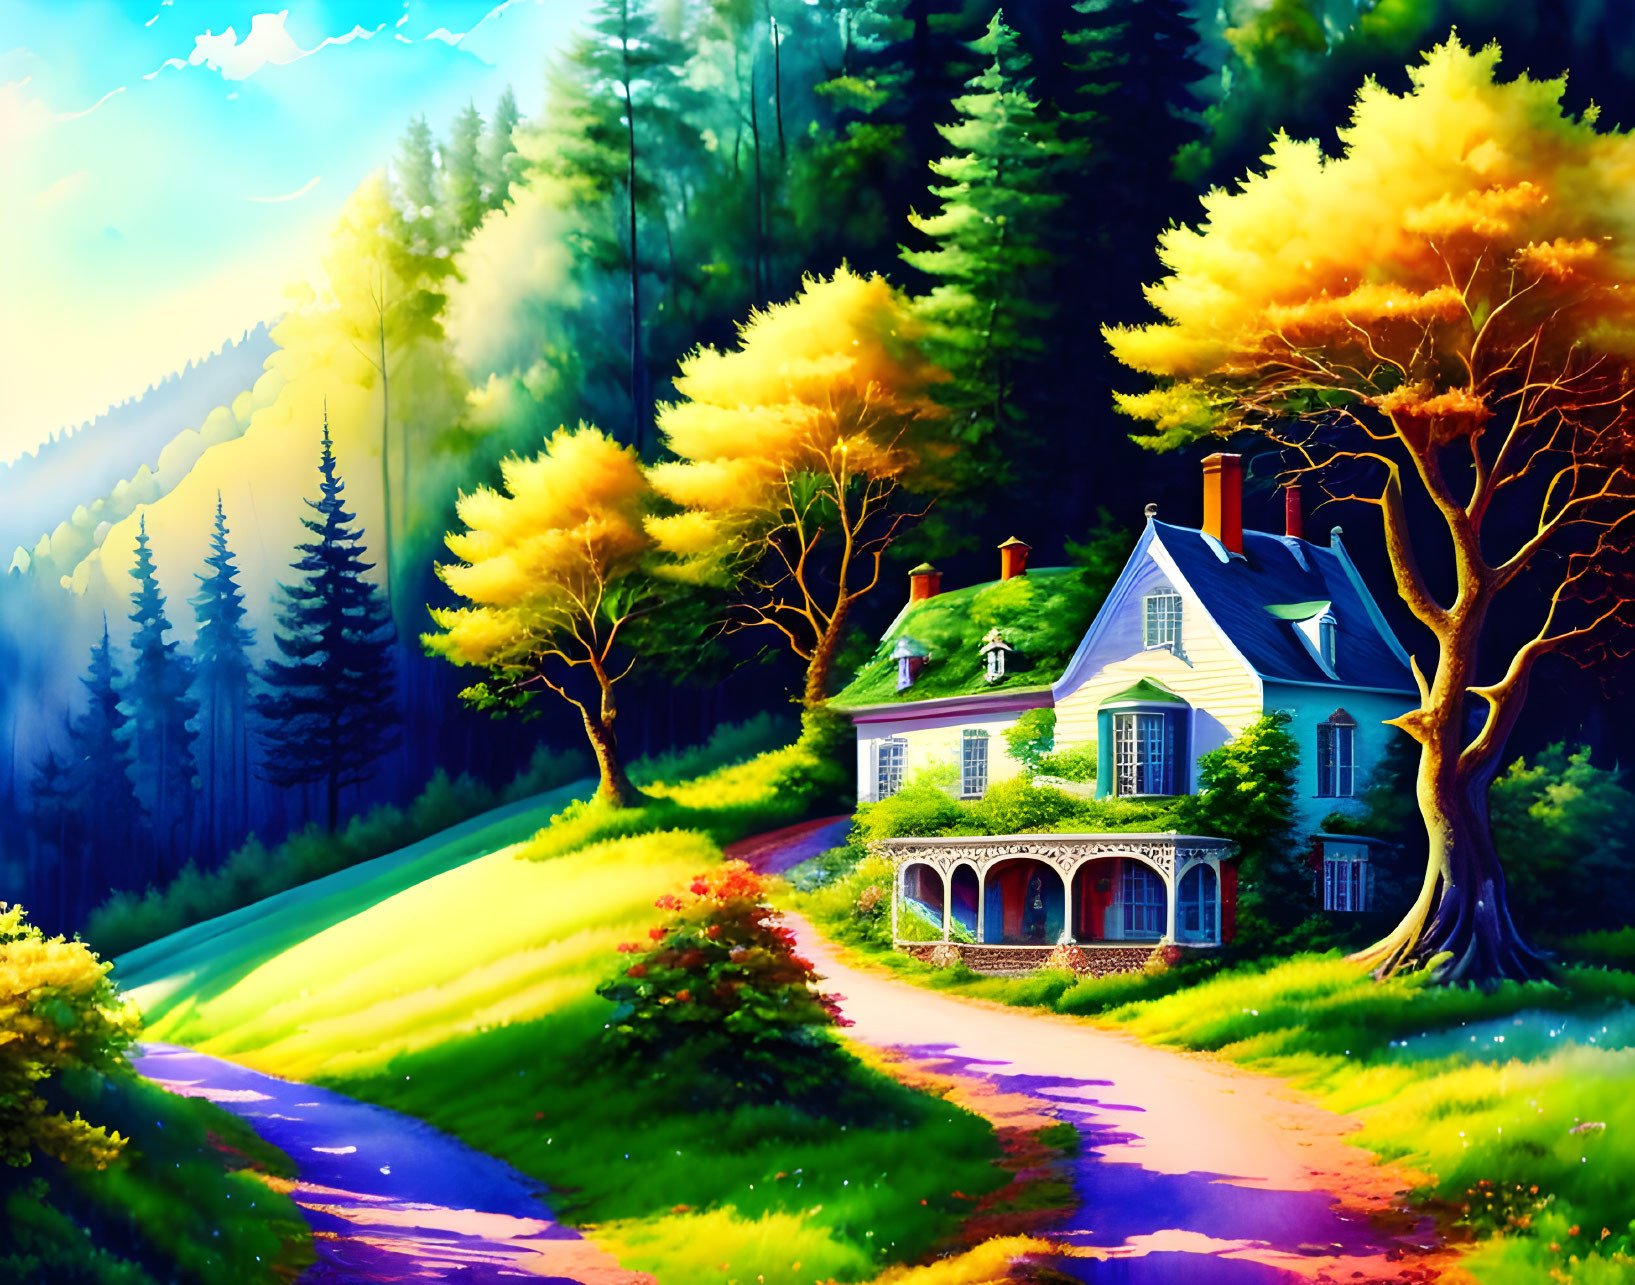 Cozy cottage in autumn forest with winding path under sunny sky